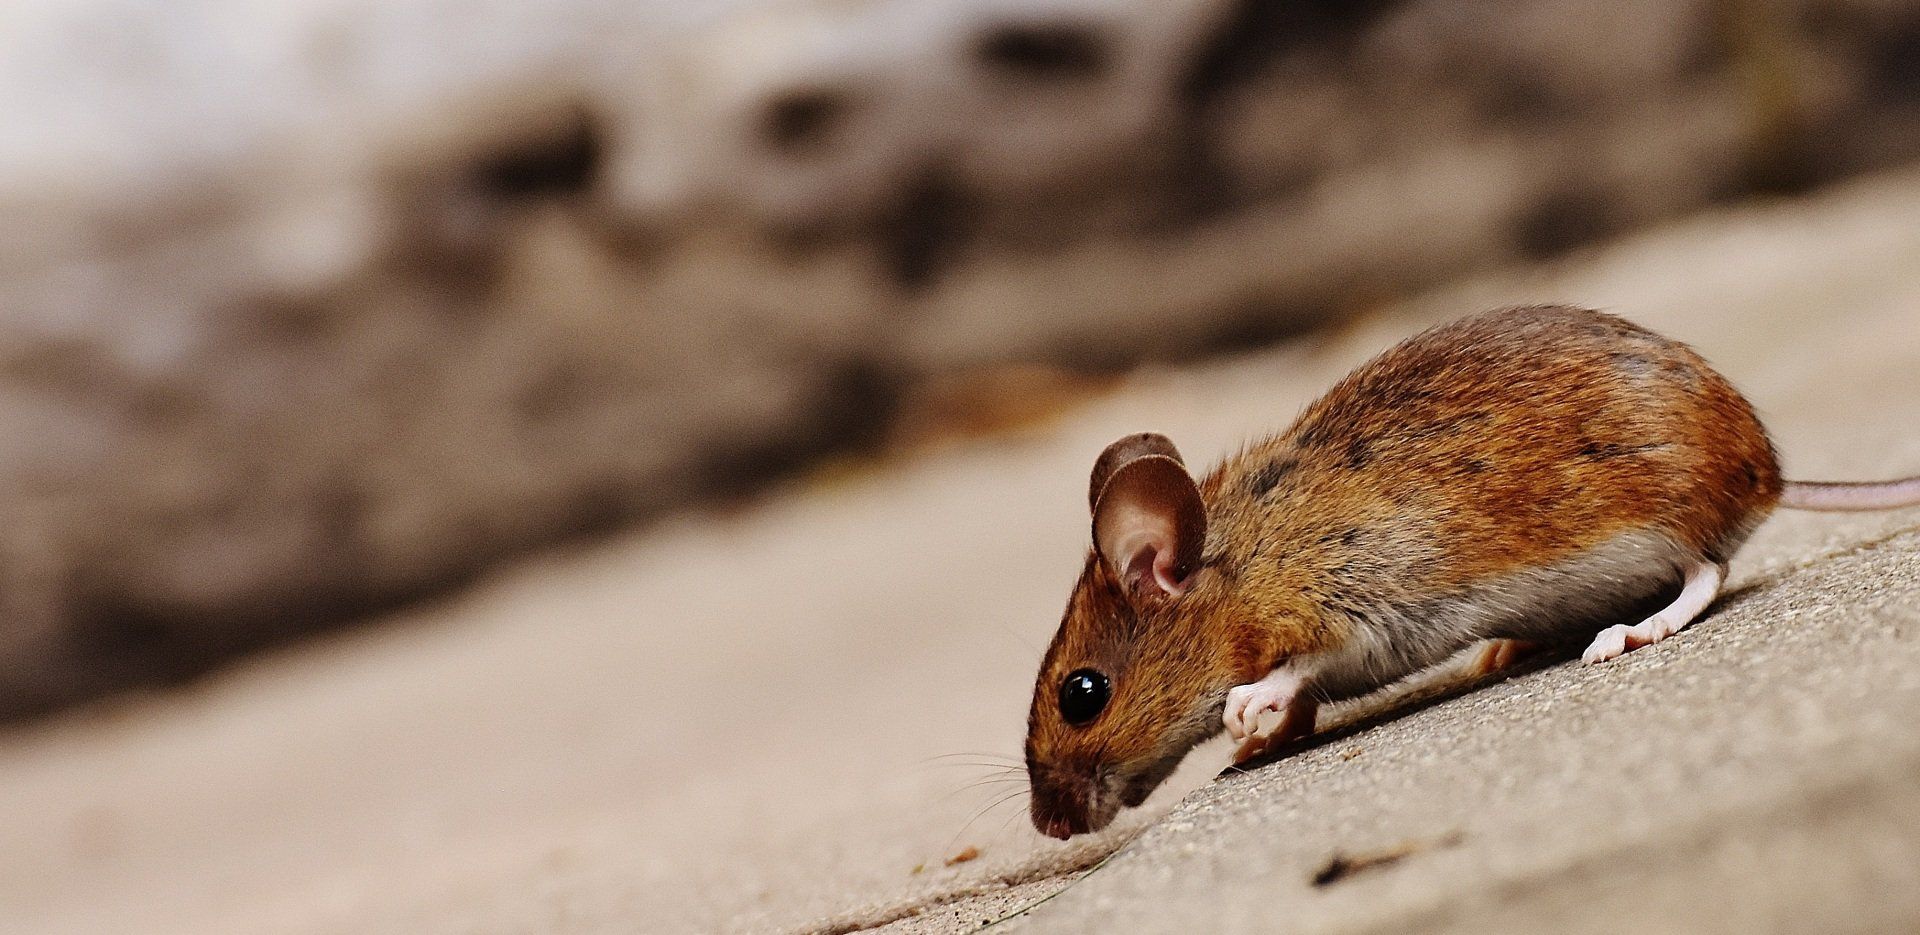 a small brown mouse standing on a concrete surface